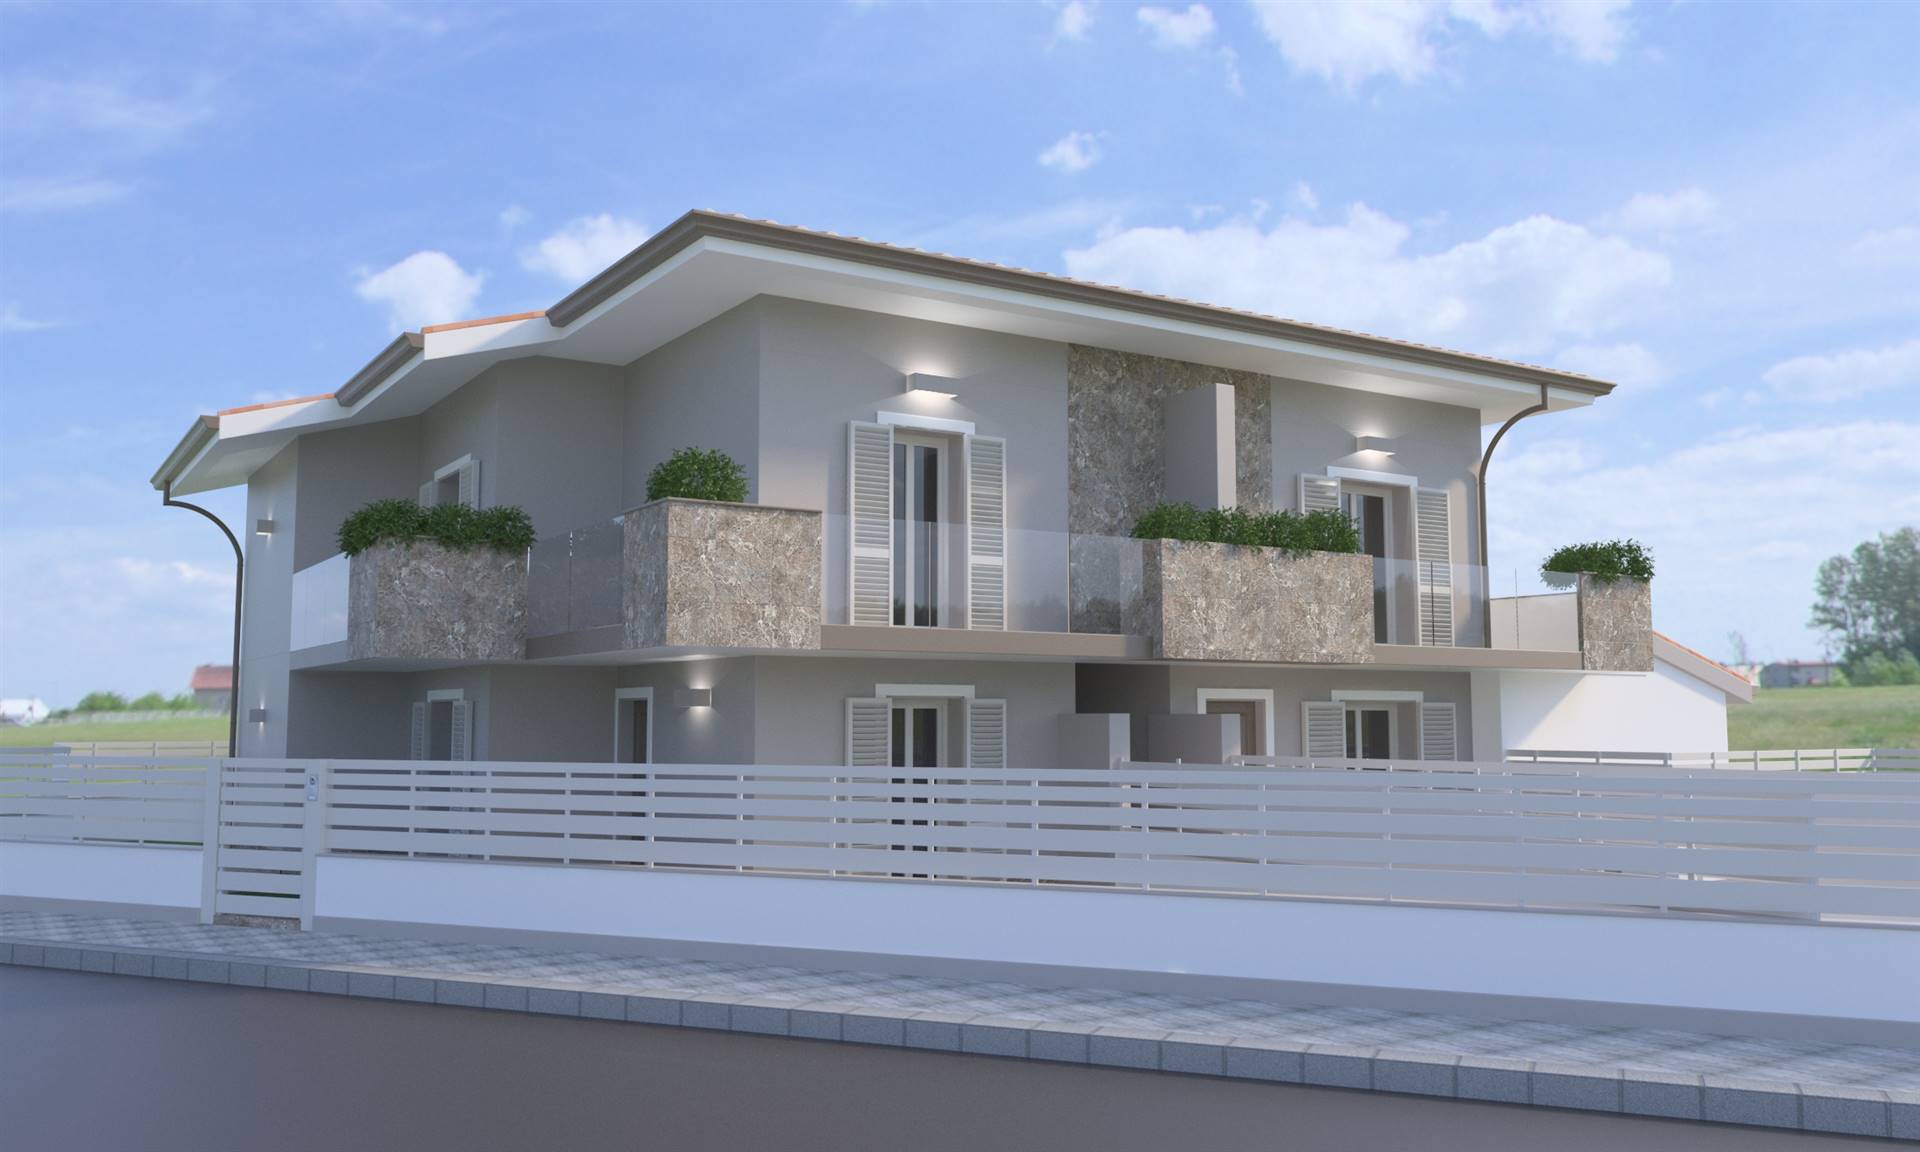 LA VILLA, CAMPI BISENZIO, Apartment for sale of 80 Sq. mt., New construction, Heating Individual heating system, Energetic class: A+, placed at 1° on 